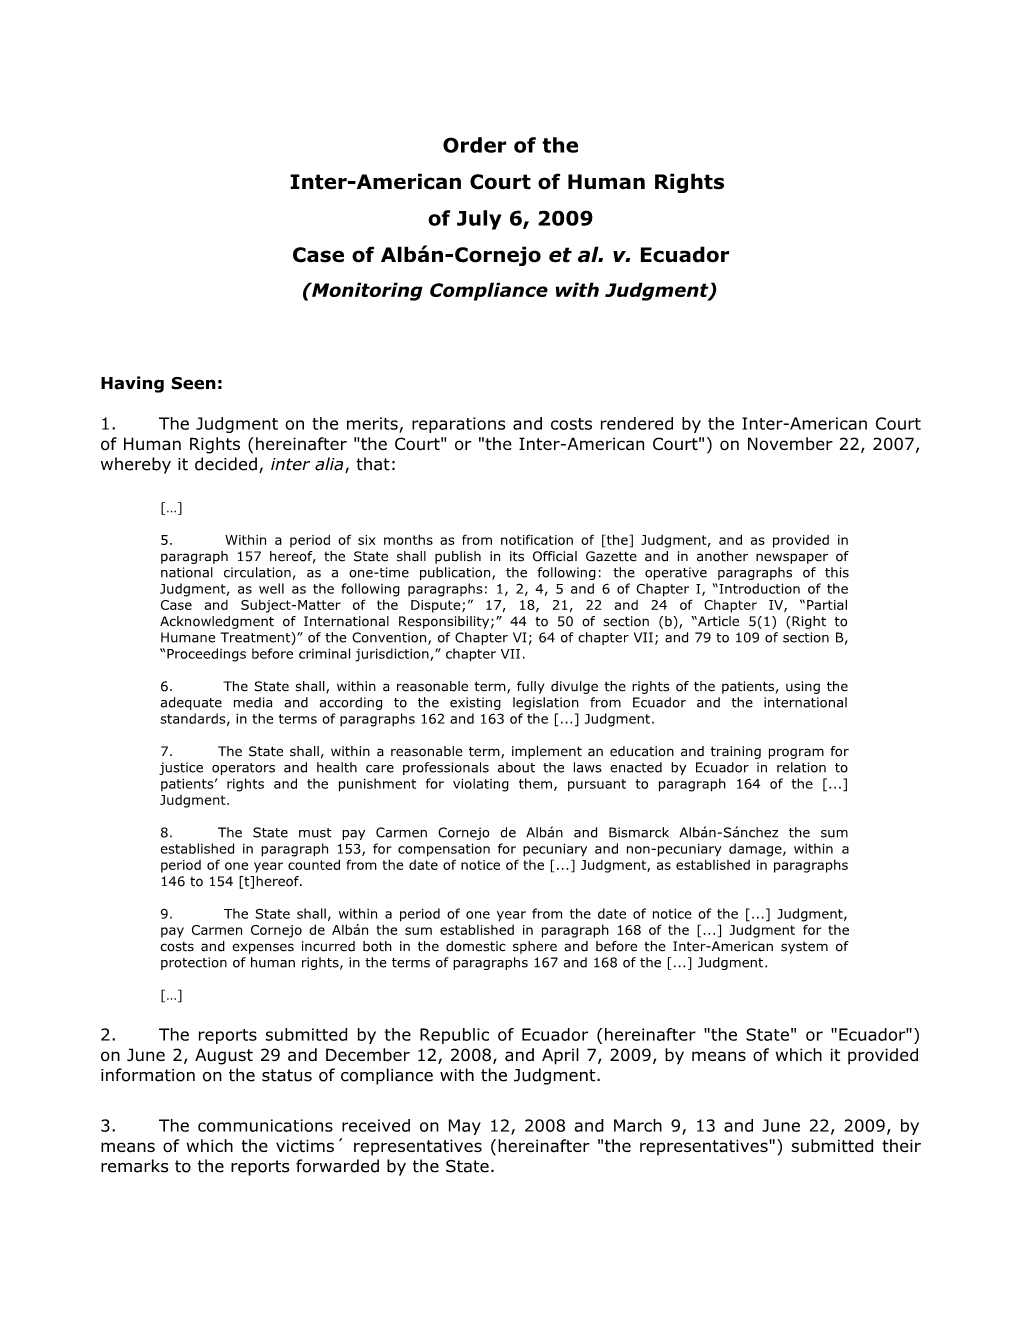 Inter-American Court of Human Rights s20